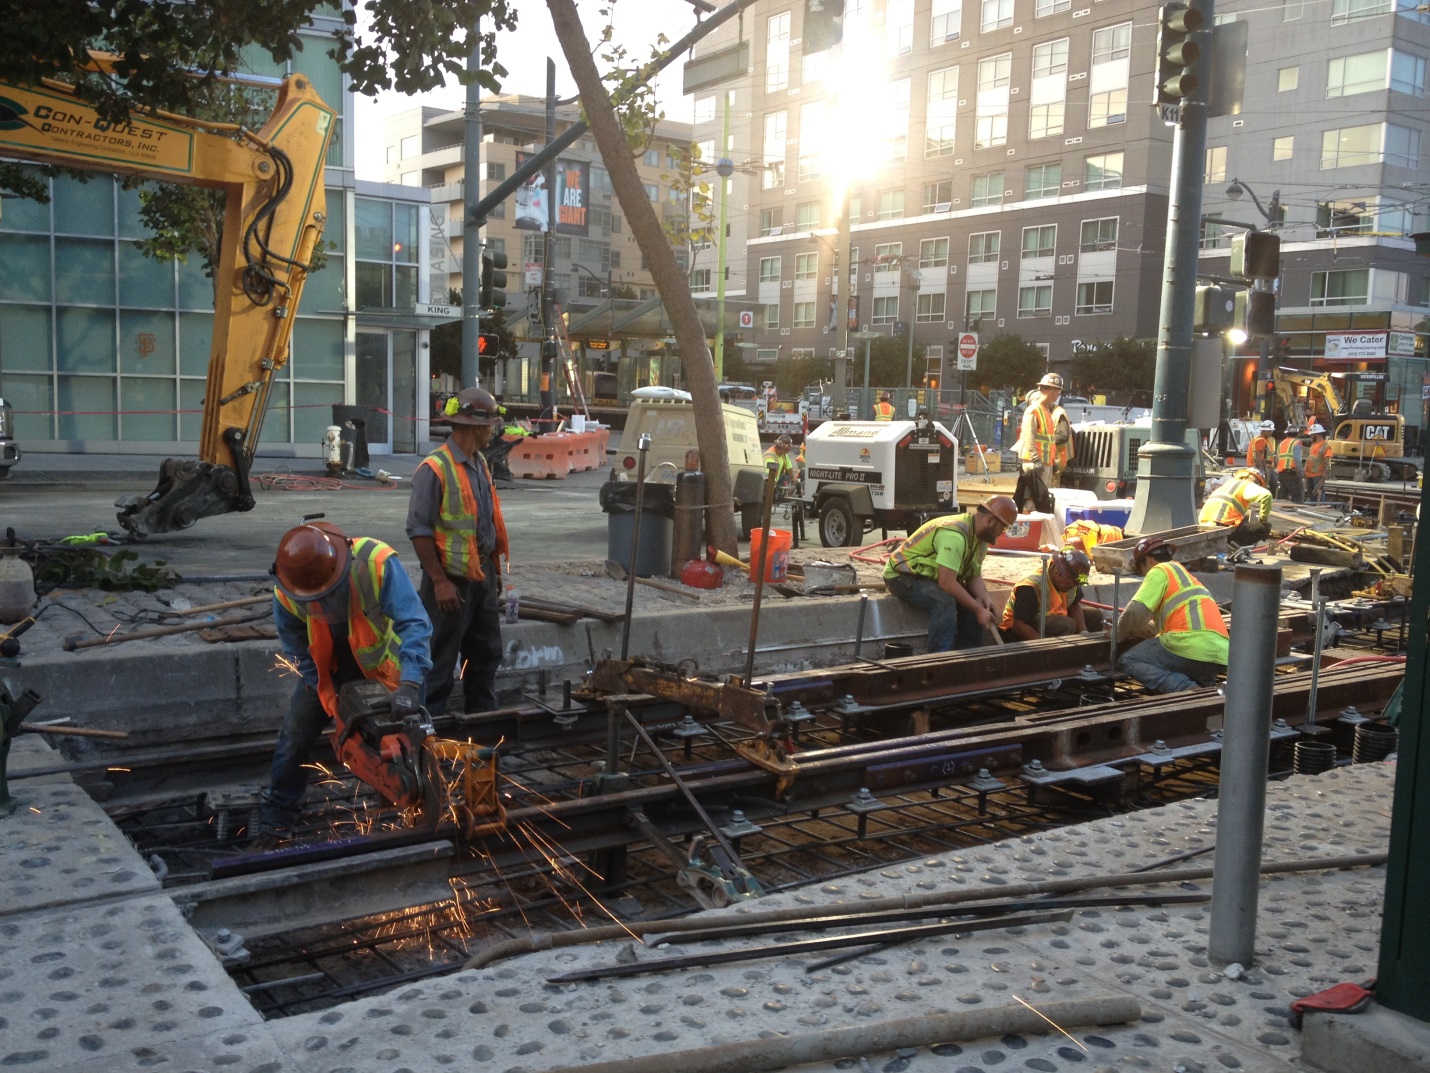 Crews in safety vests and hard hats work in pits along the tracks on King Street with the sun brightly reflected in the building behind them.